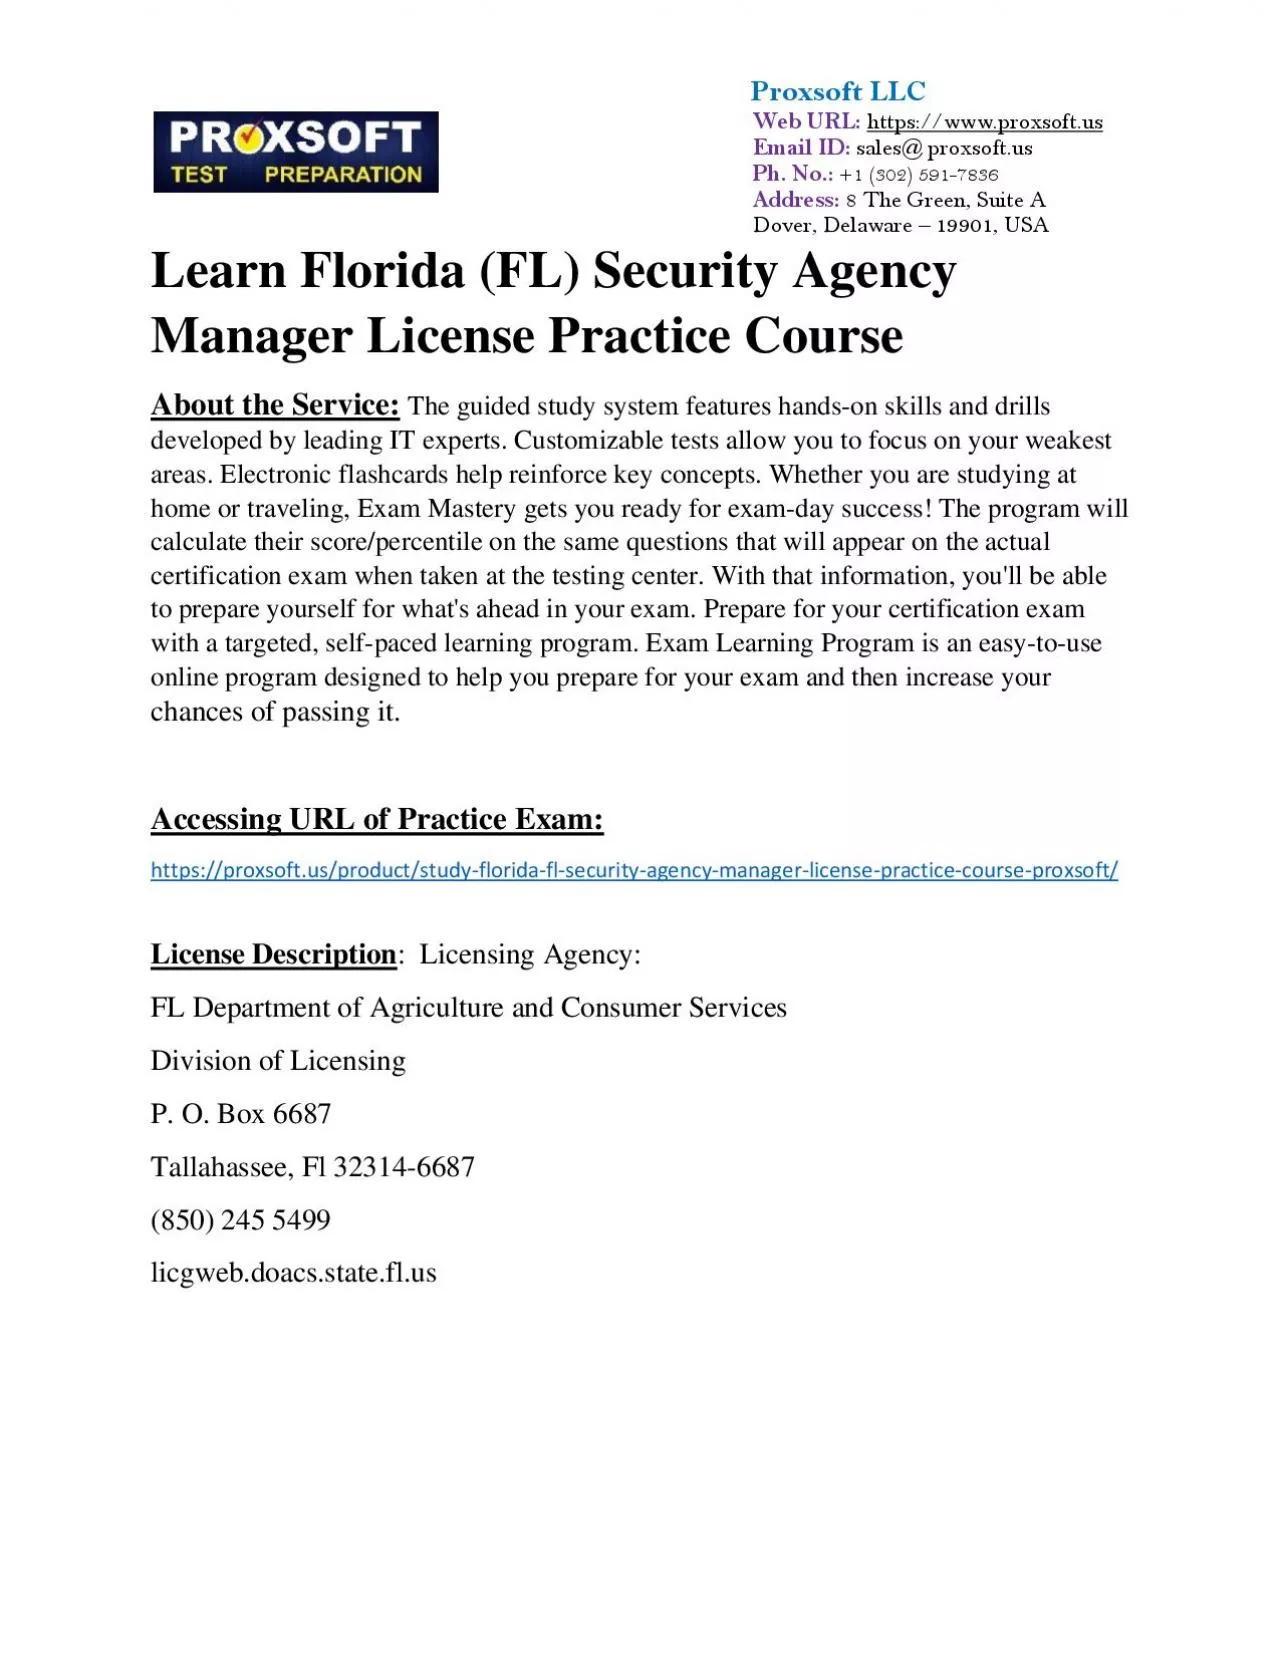 Learn Florida (FL) Security Agency Manager License Practice Course